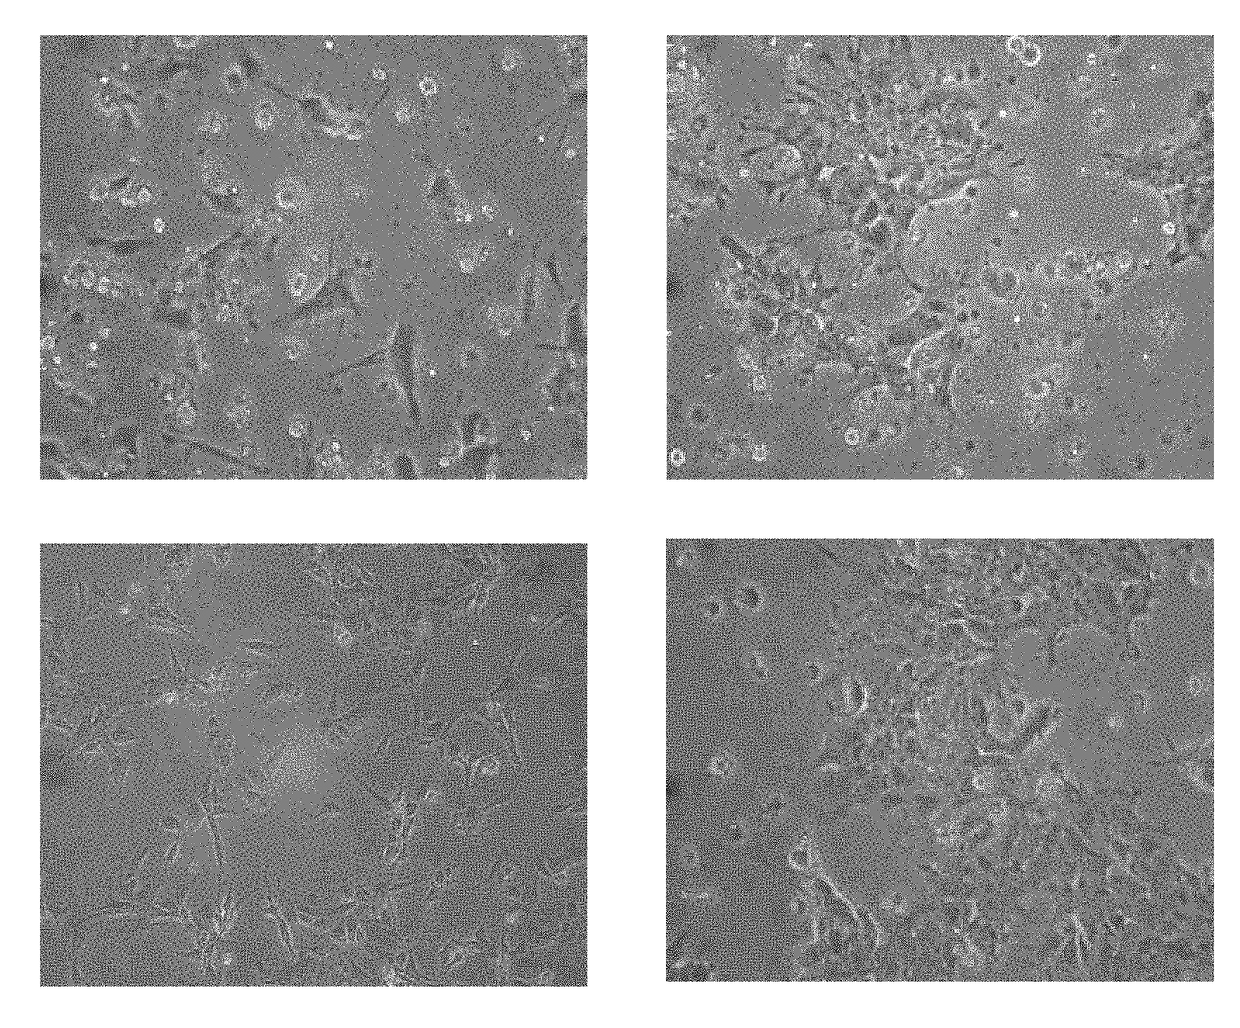 Induction of hepatocytes by stem cell differentiation with RNA